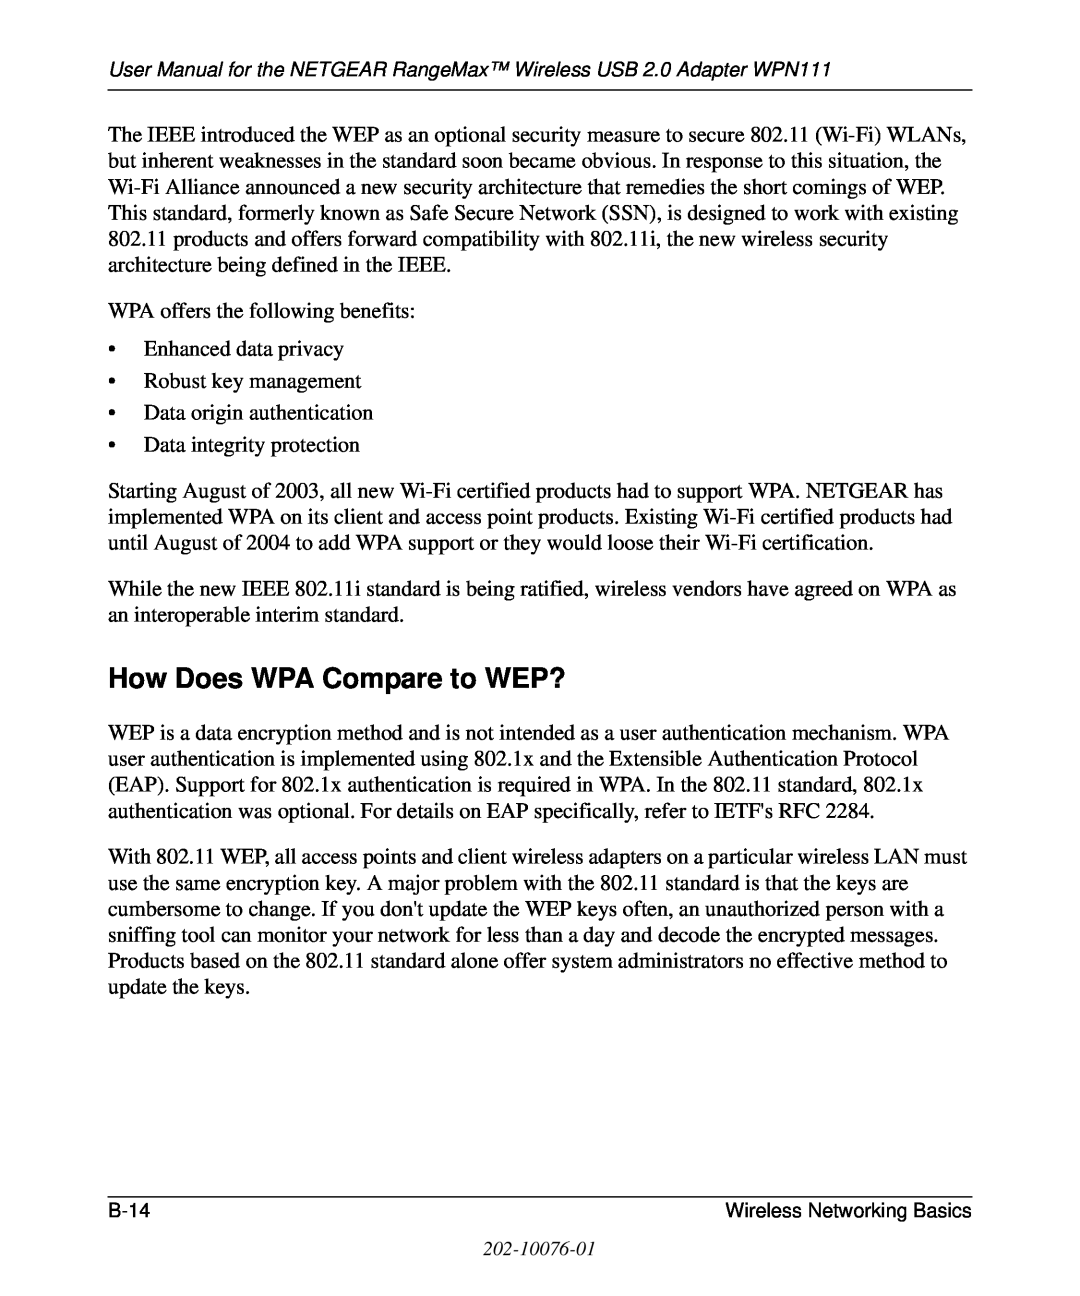 NETGEAR WPN111 user manual How Does WPA Compare to WEP? 